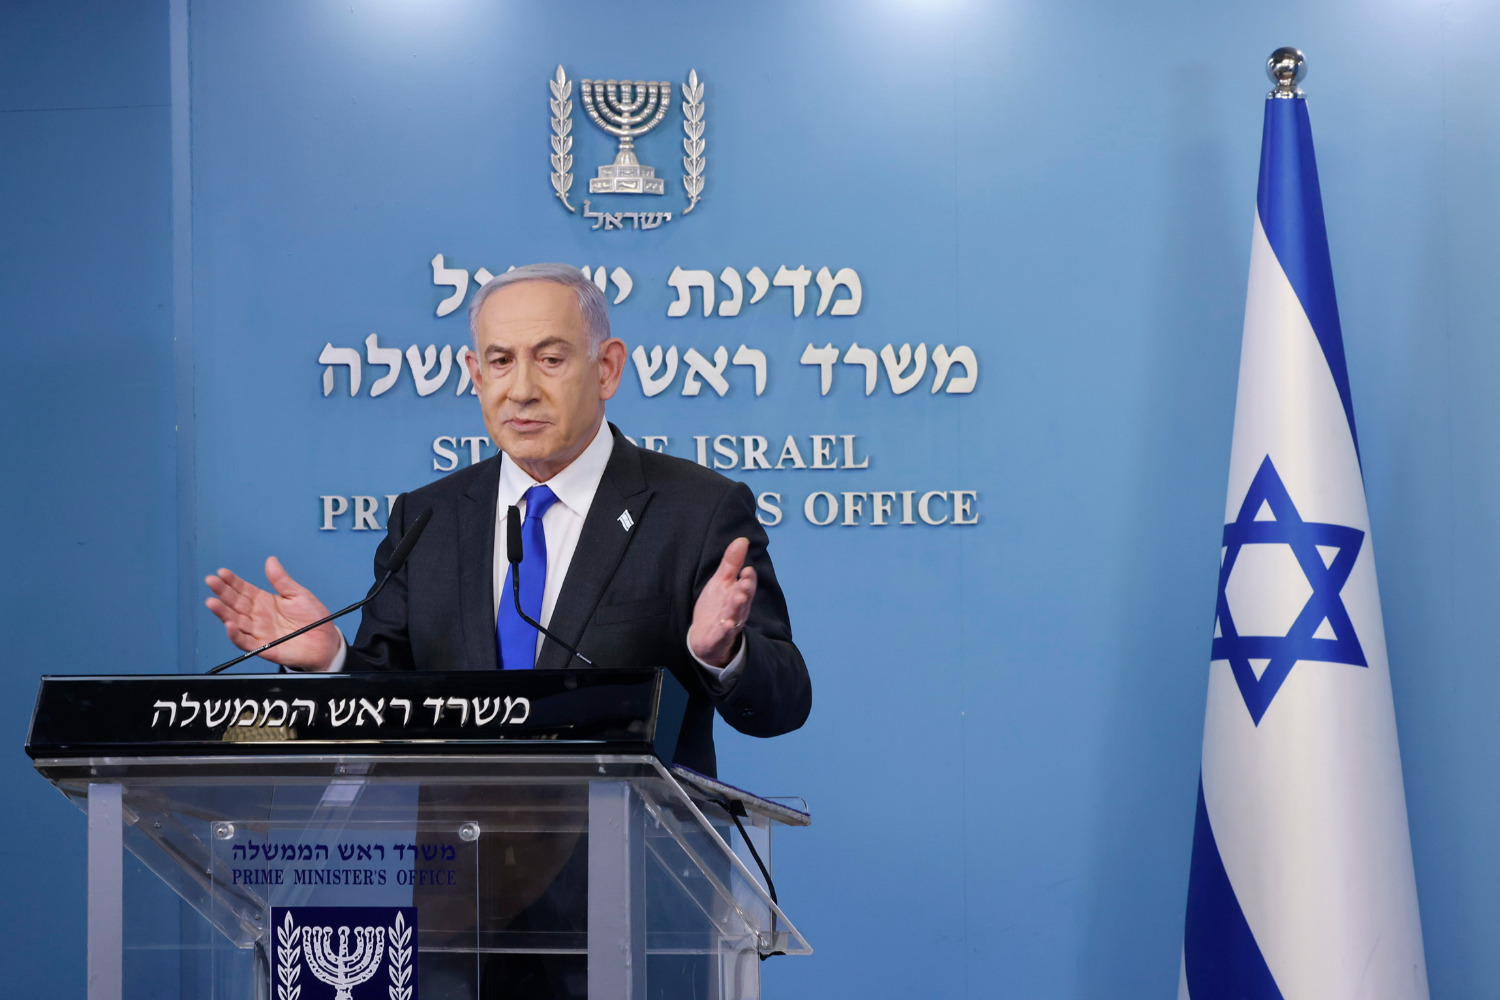 Netanyahu made a statement ahead of a decision on Hamas's response